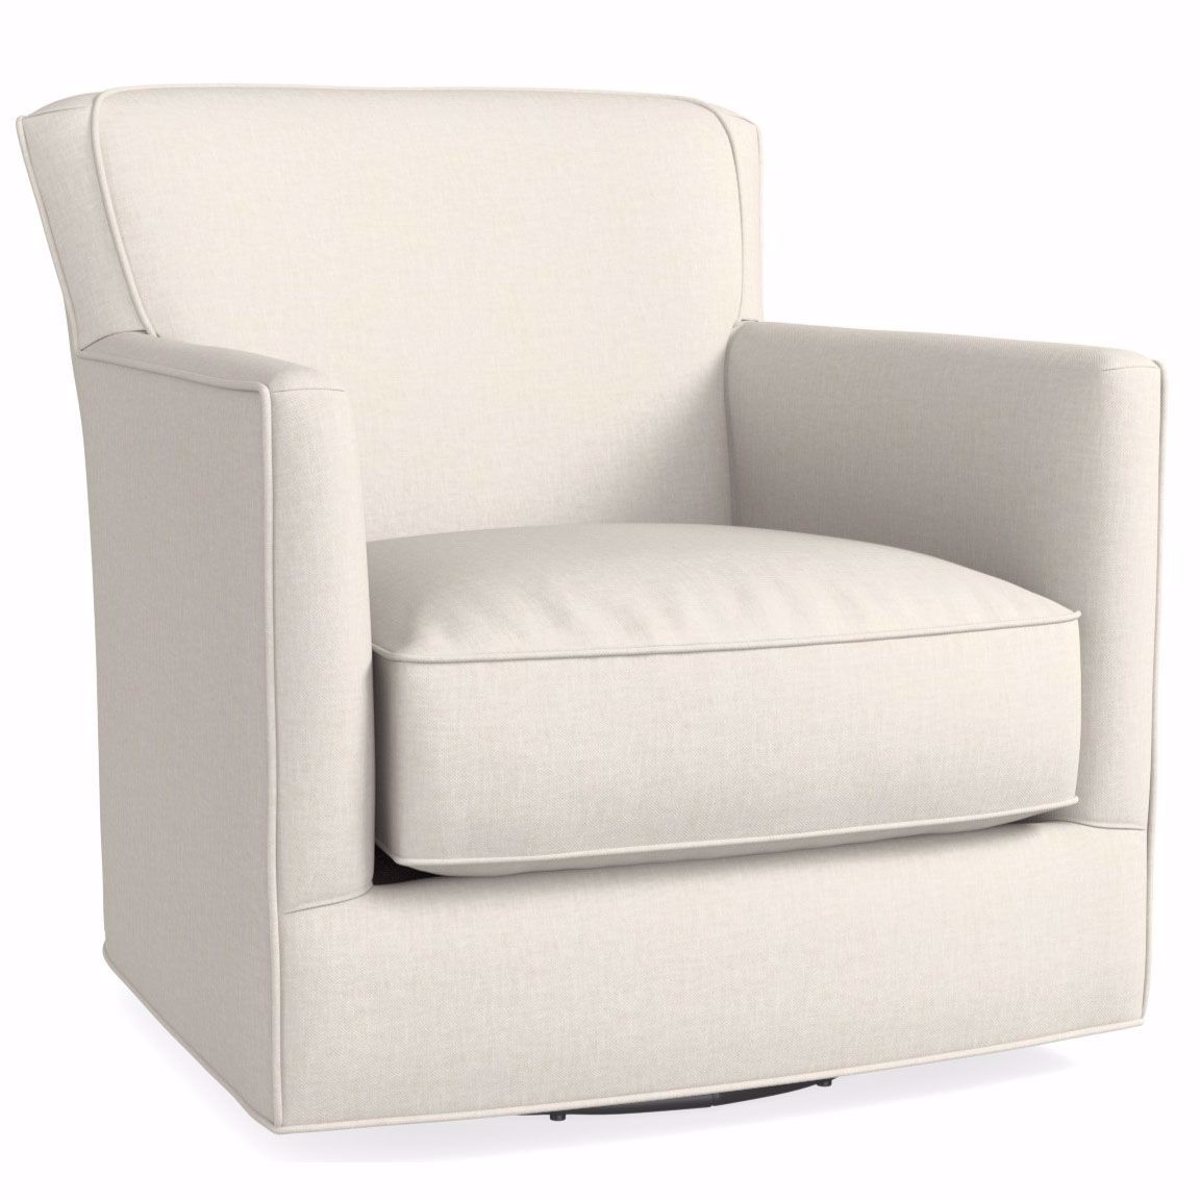 Picture of New American Living Swivel Glider